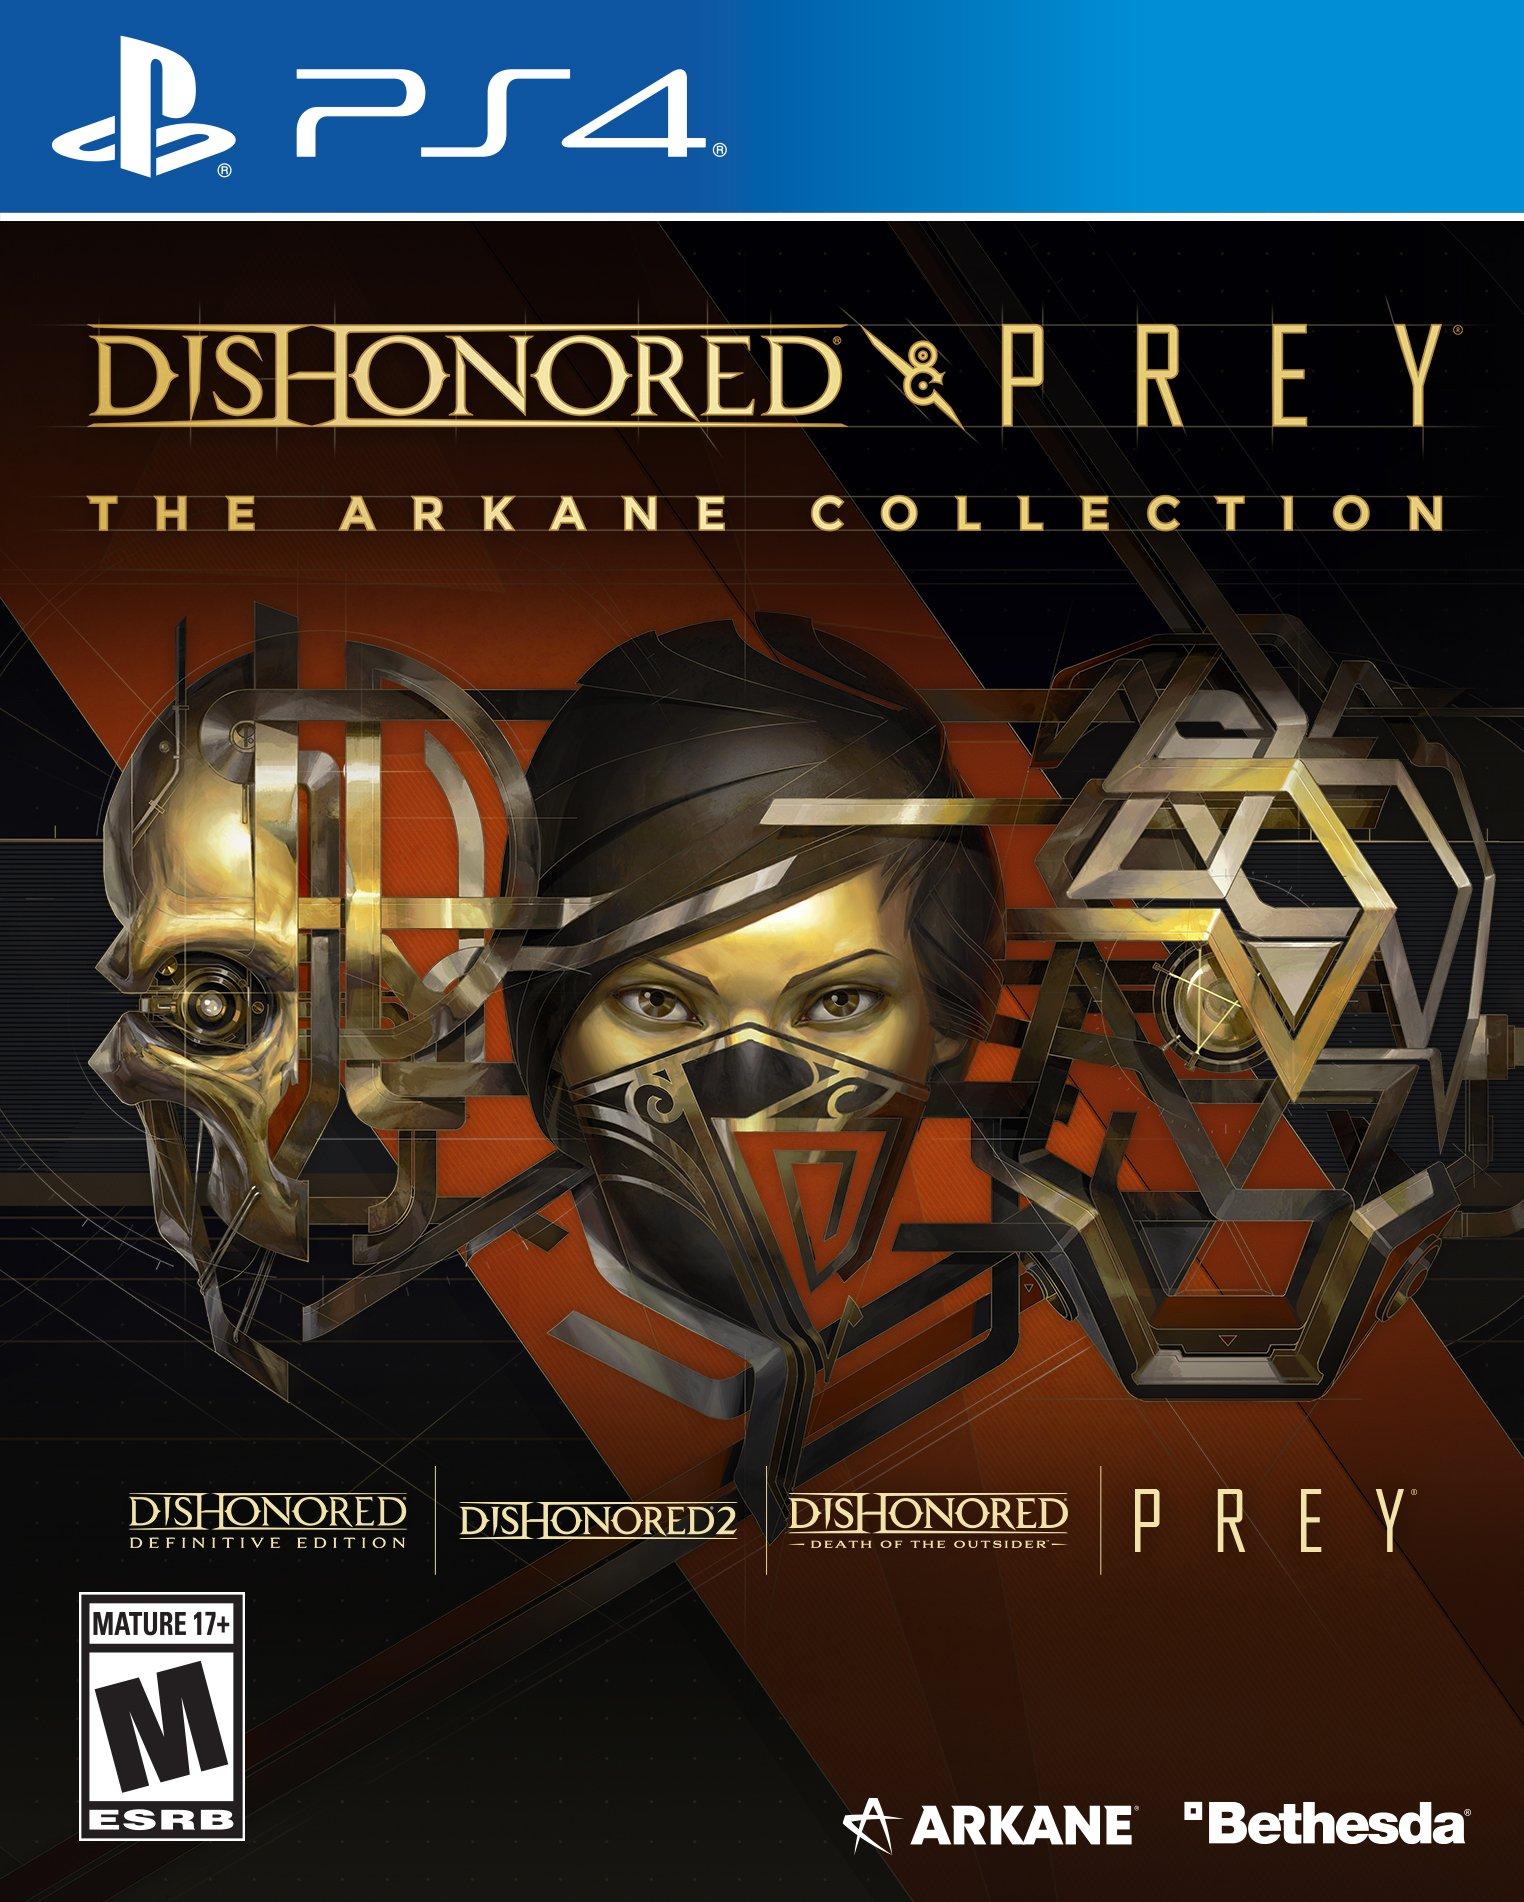 Dishonored Definitive Edition Ps4 PlayStation 4 Game Great for sale online